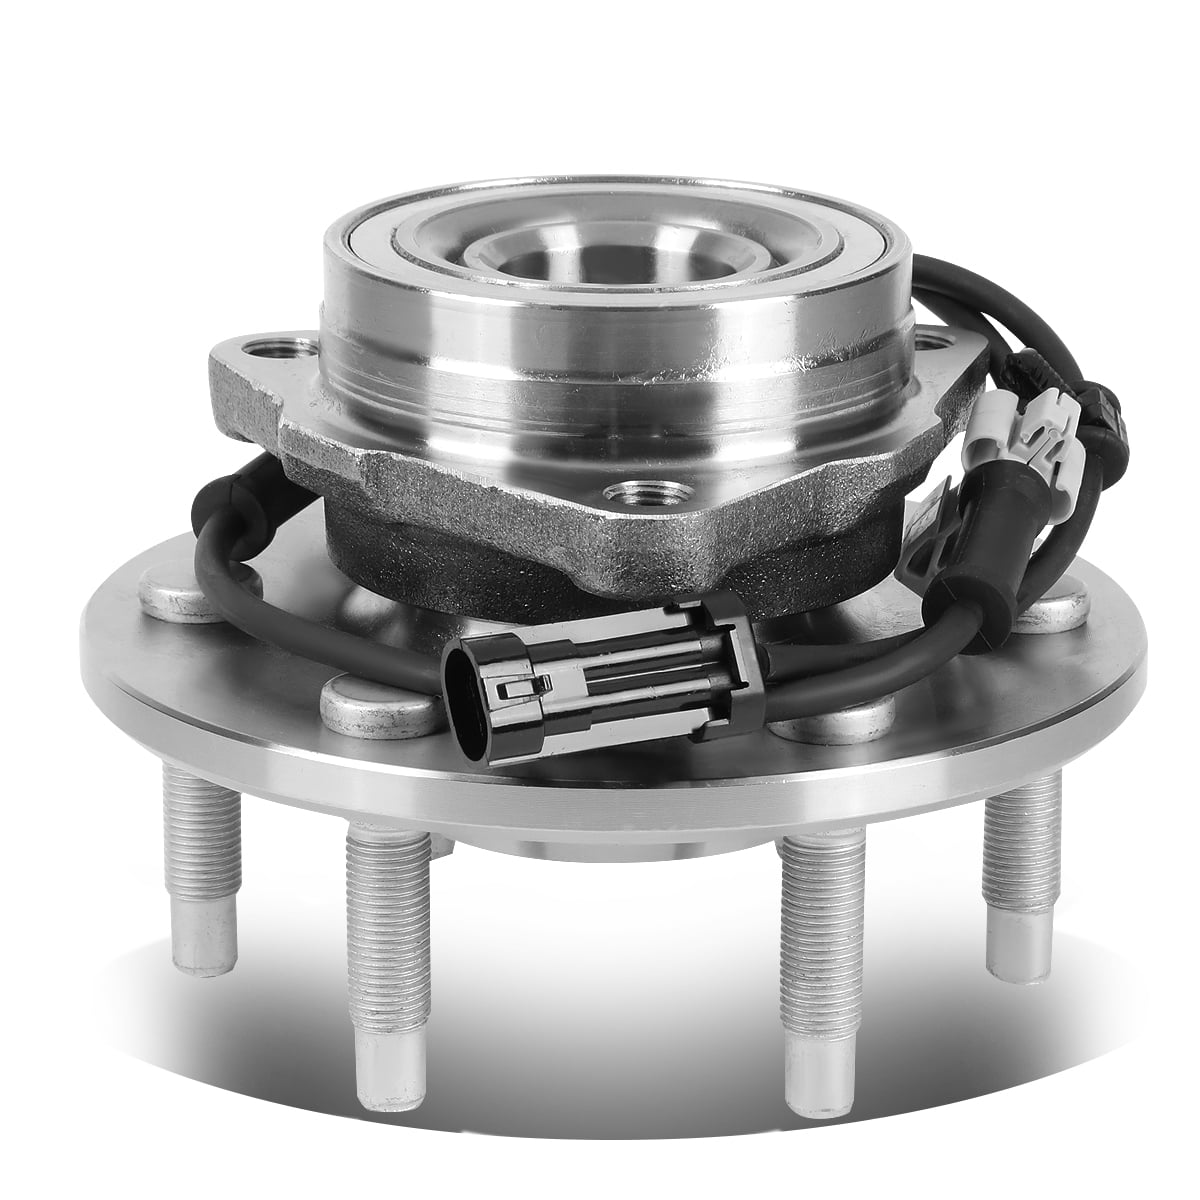 For Chevy Silverado GMC Sierra Escalade Front Wheel Hub Bearing Assembly CSW